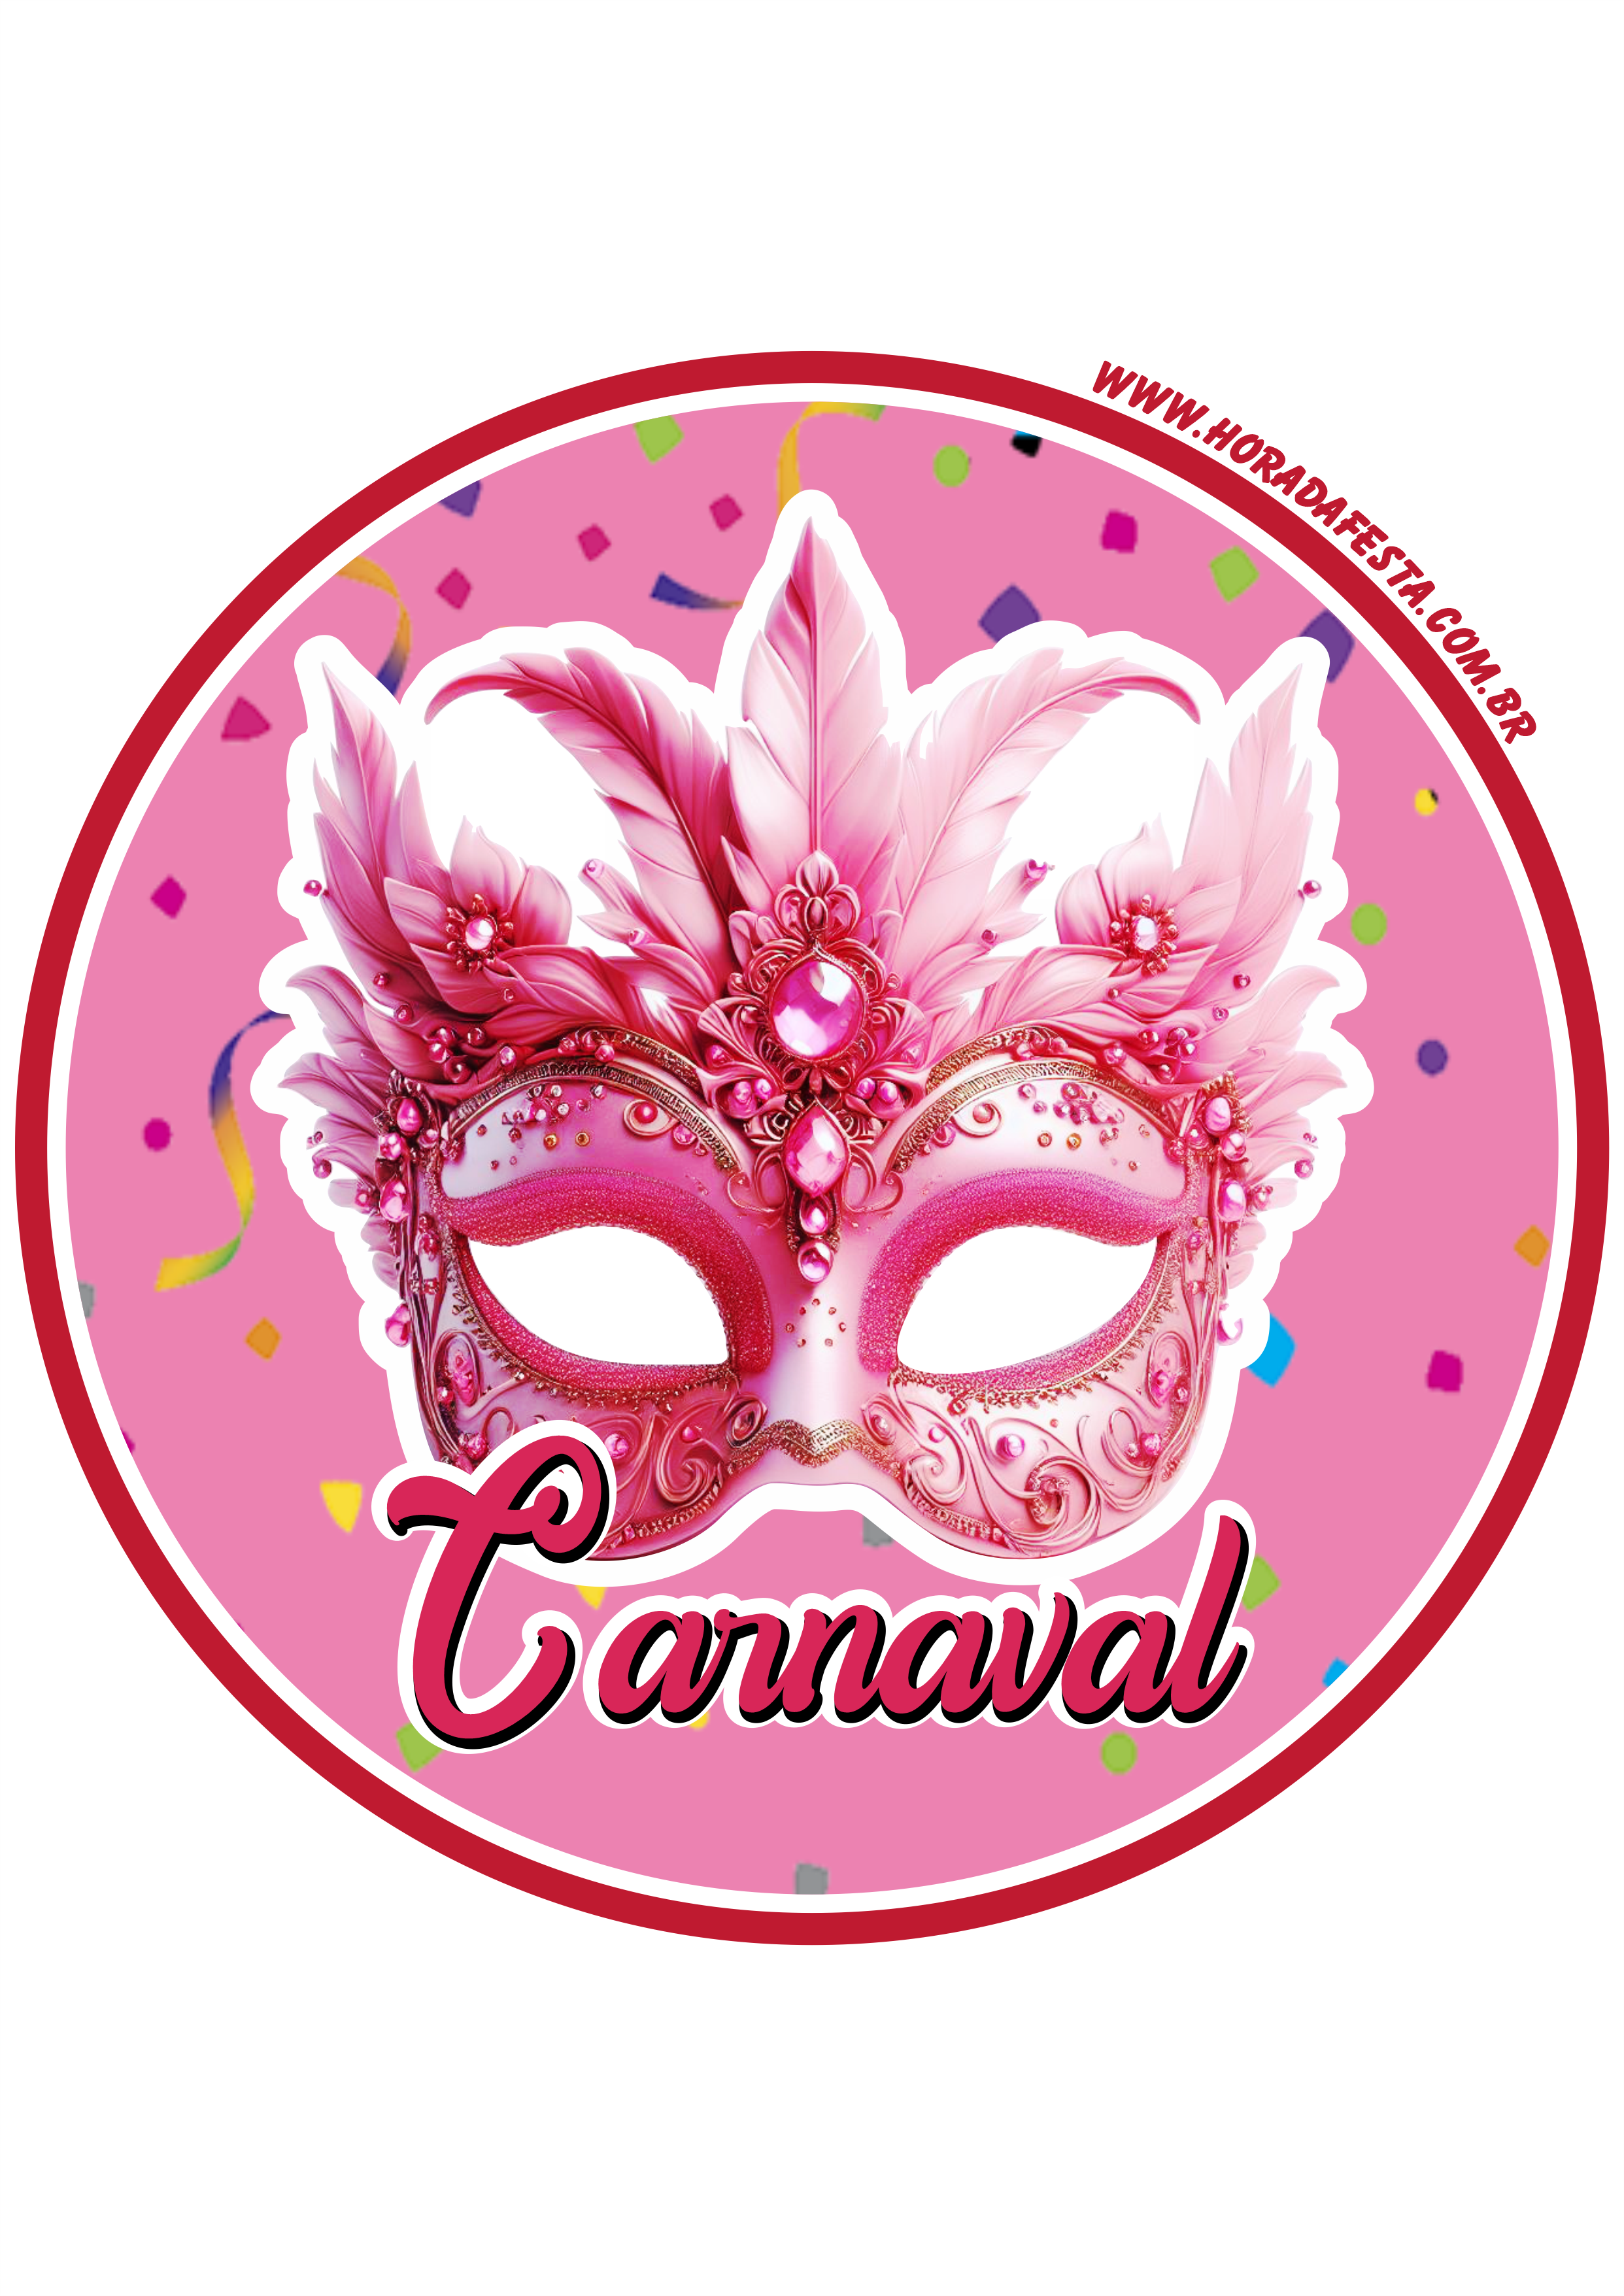 Carnaval 2024 adesivo rosa brilhante redondo tag sticker painel png